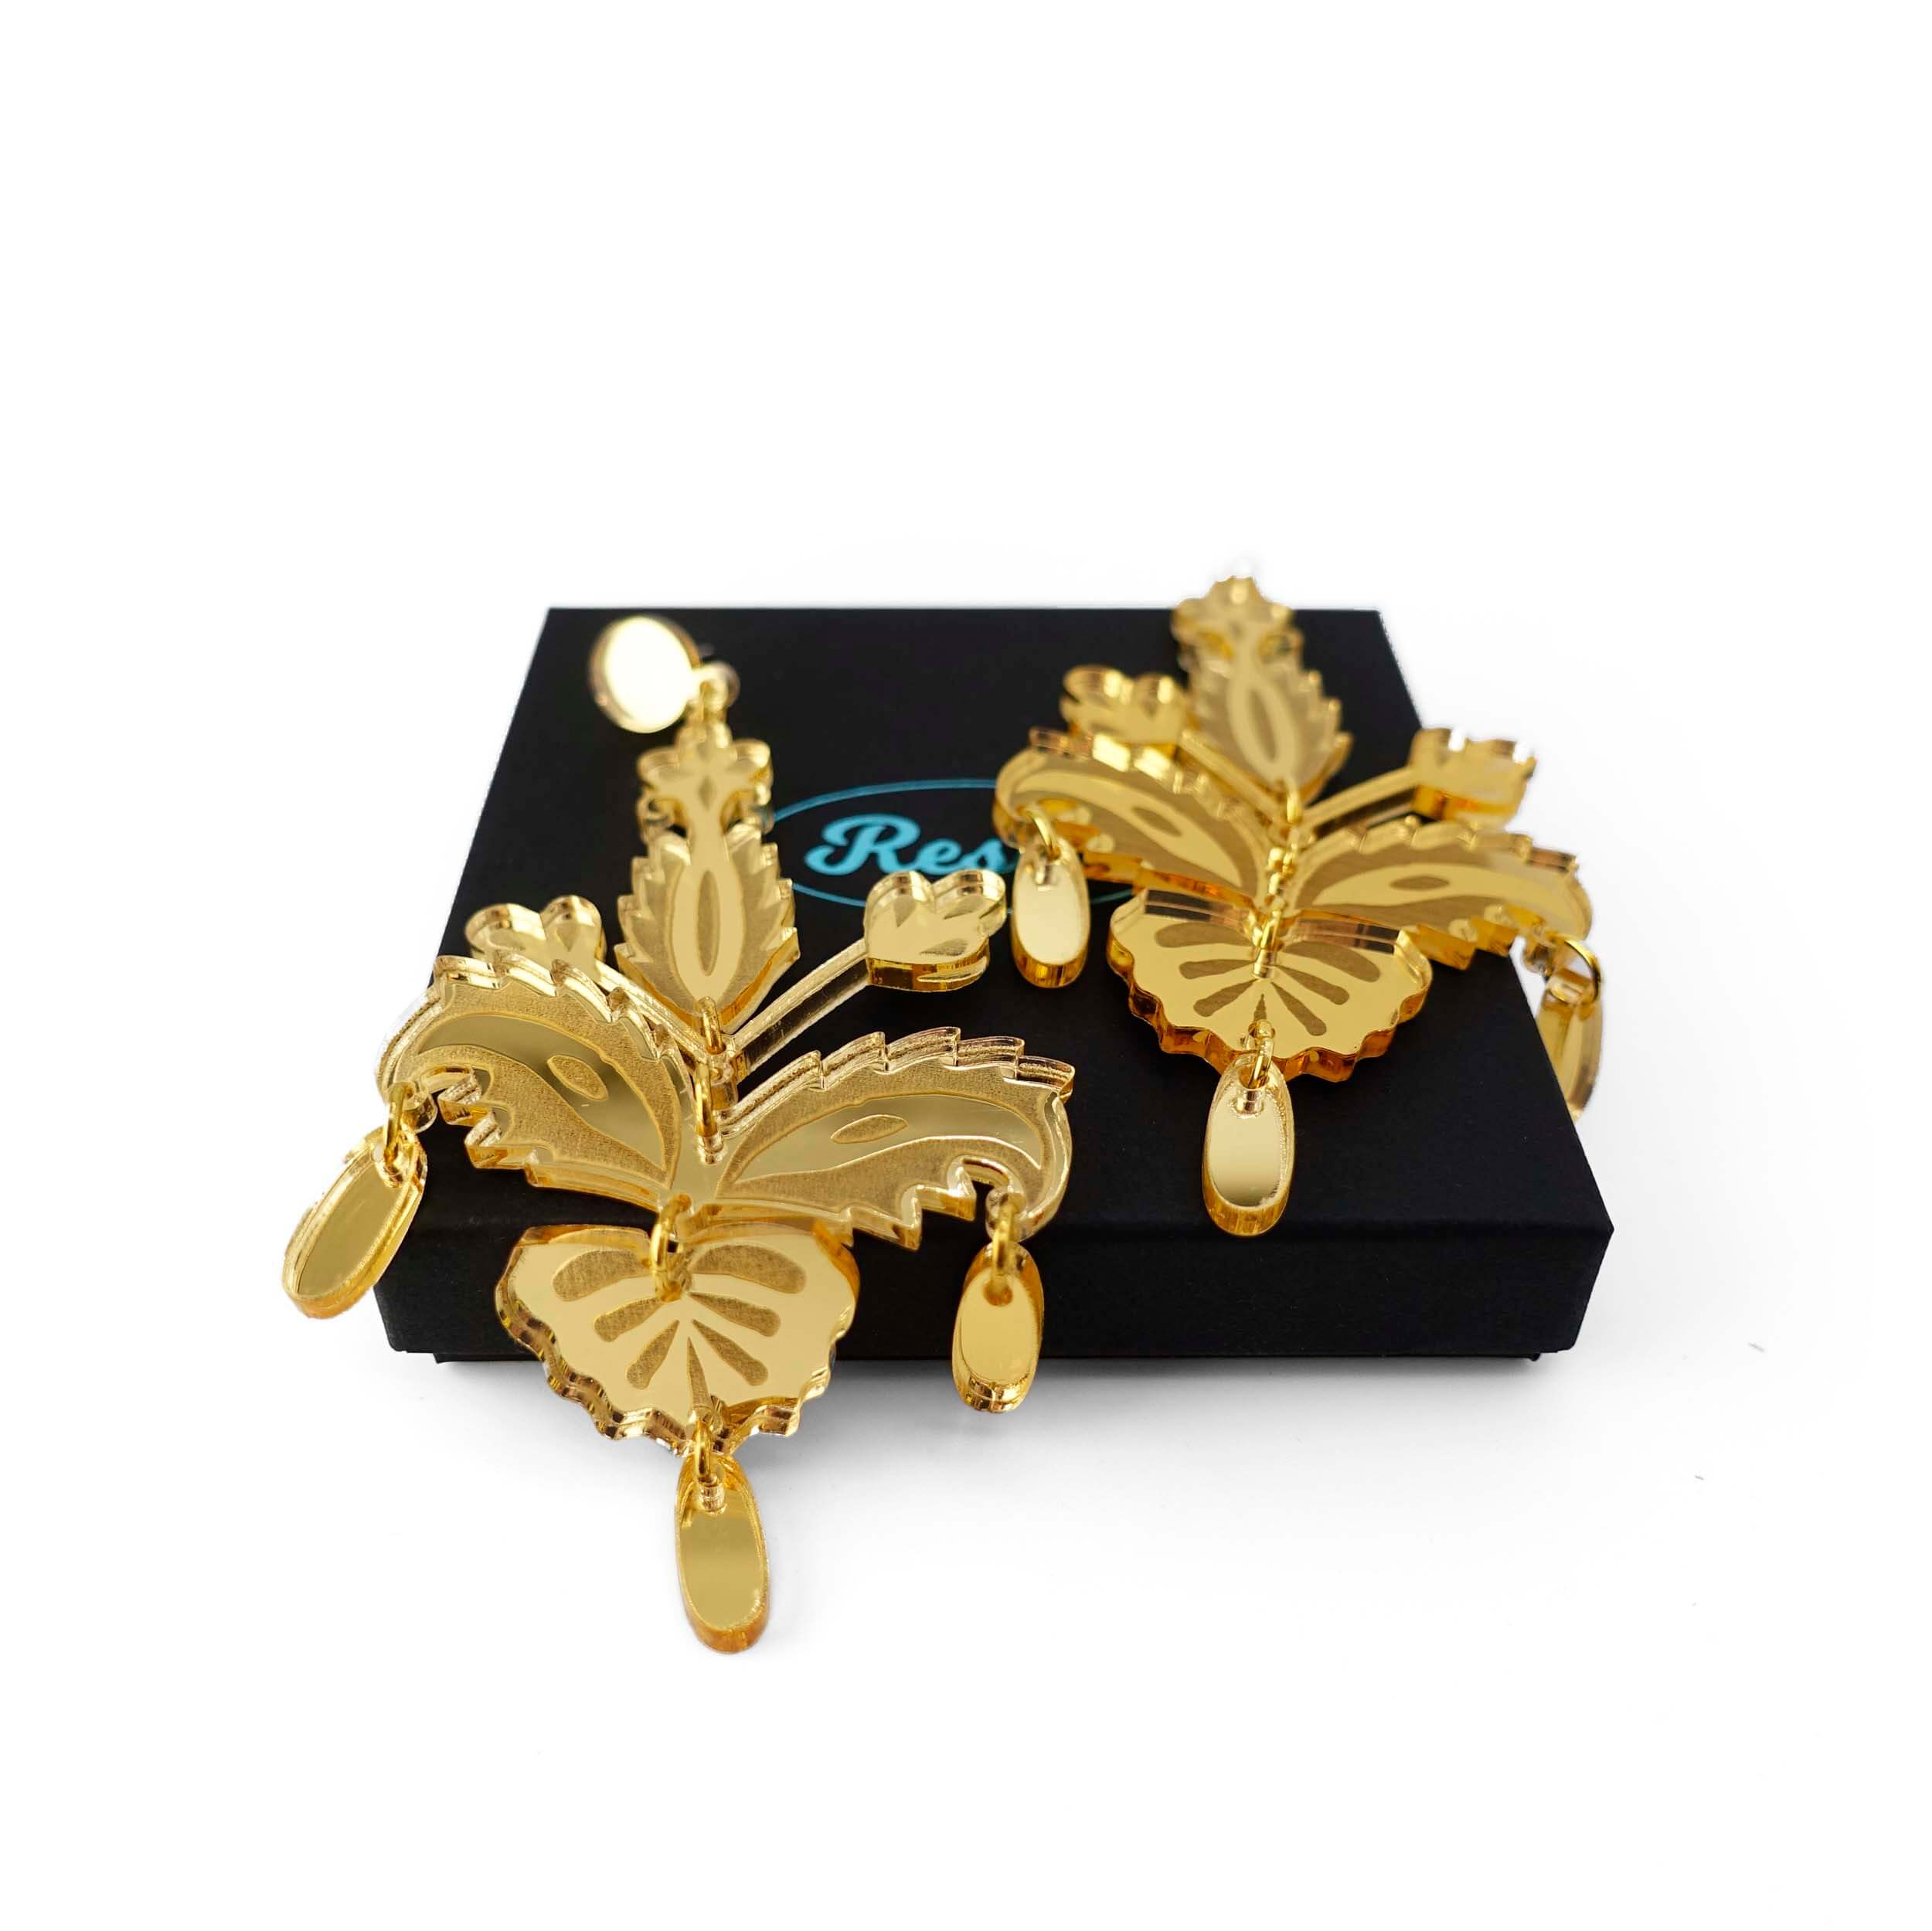 All gold festive drop statement earrings shown on a Wear and Resist gift box. 